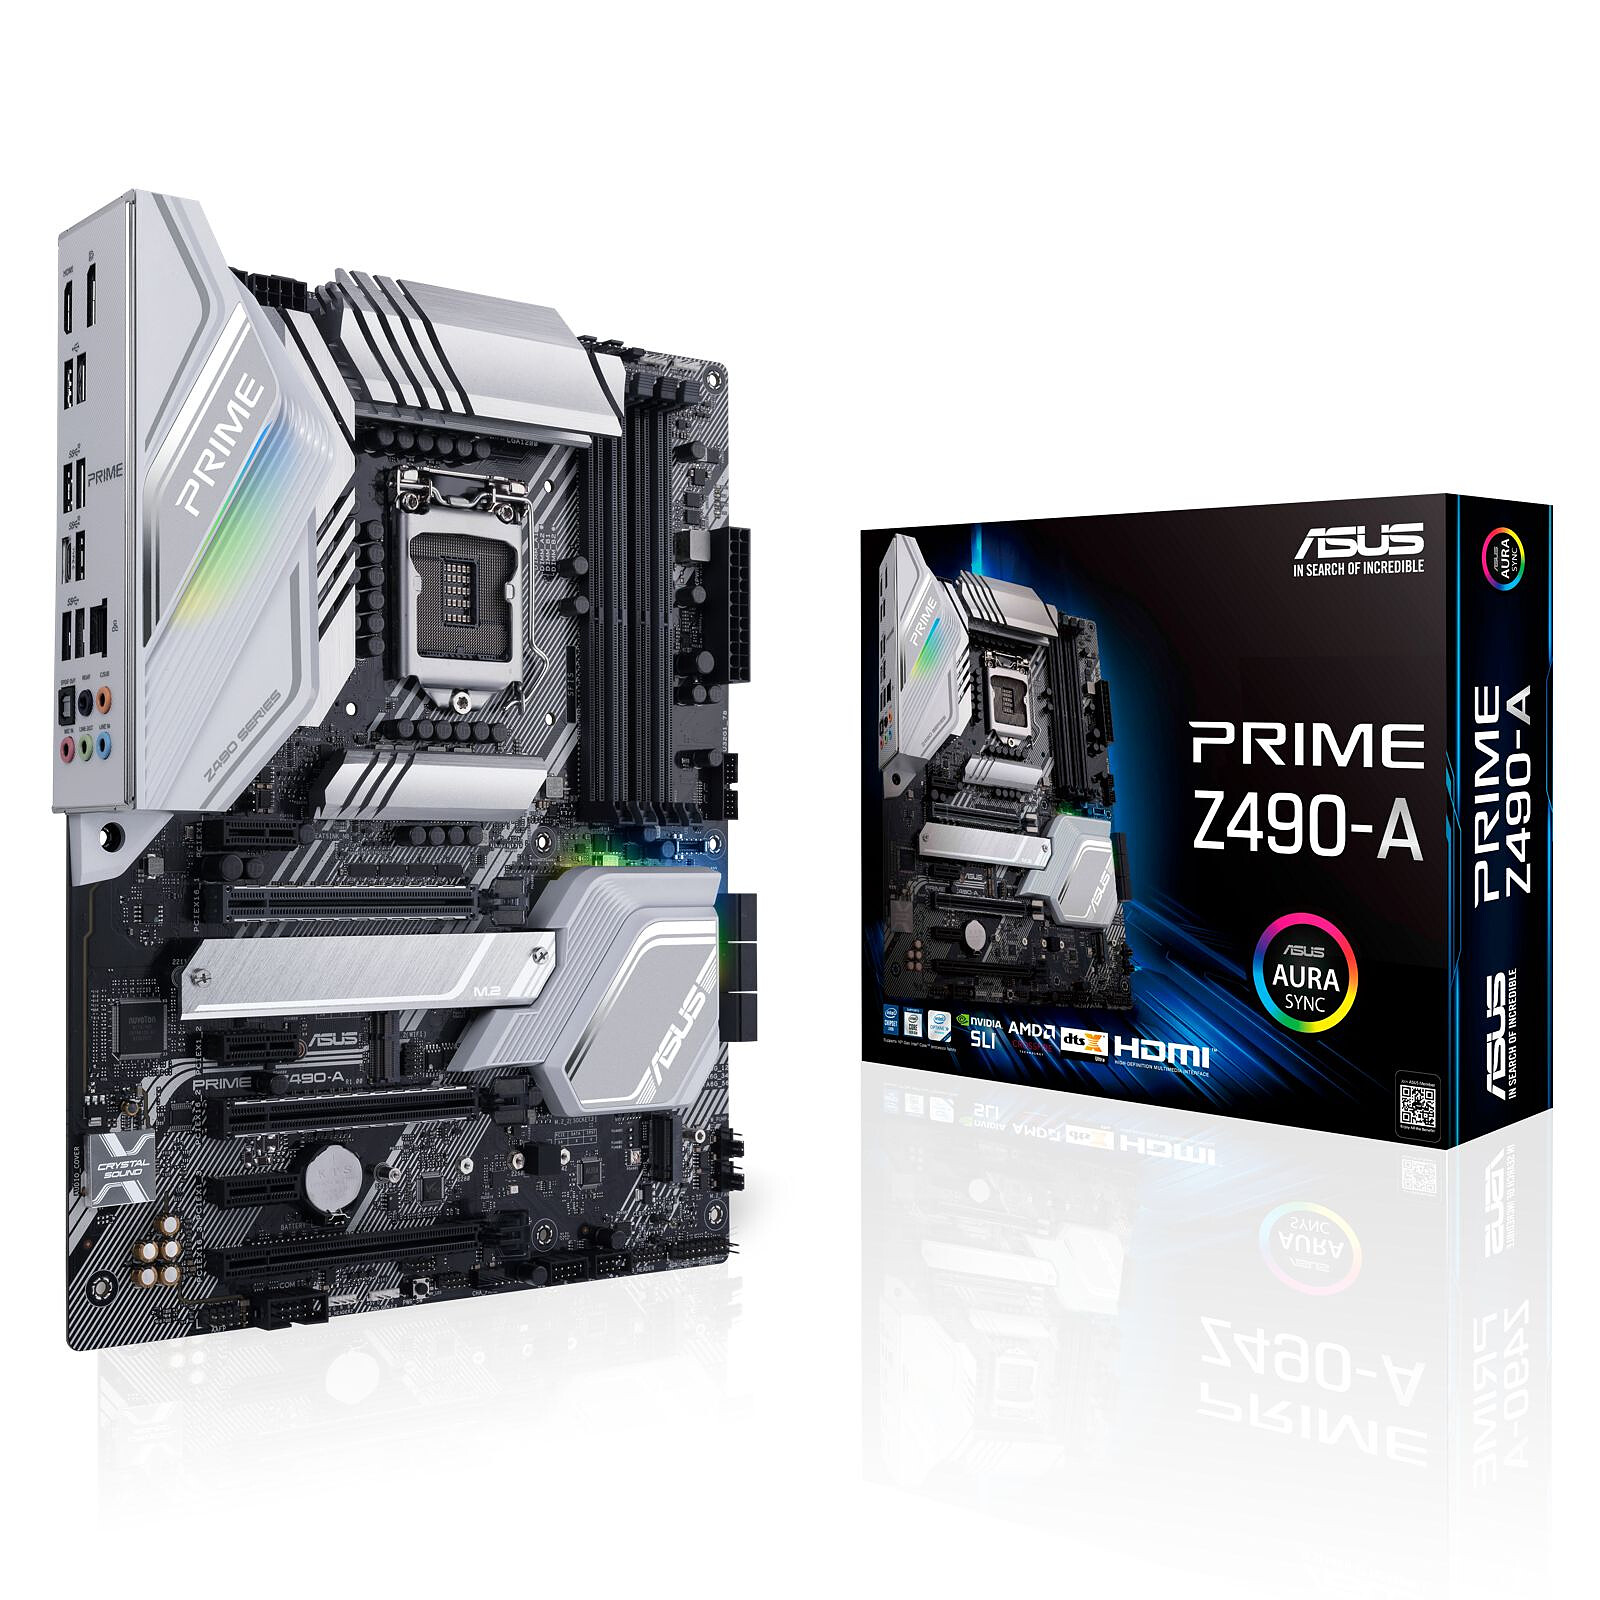 ASUS PRIME Z490-A - Motherboard - LDLC 3-year warranty | Holy Moley